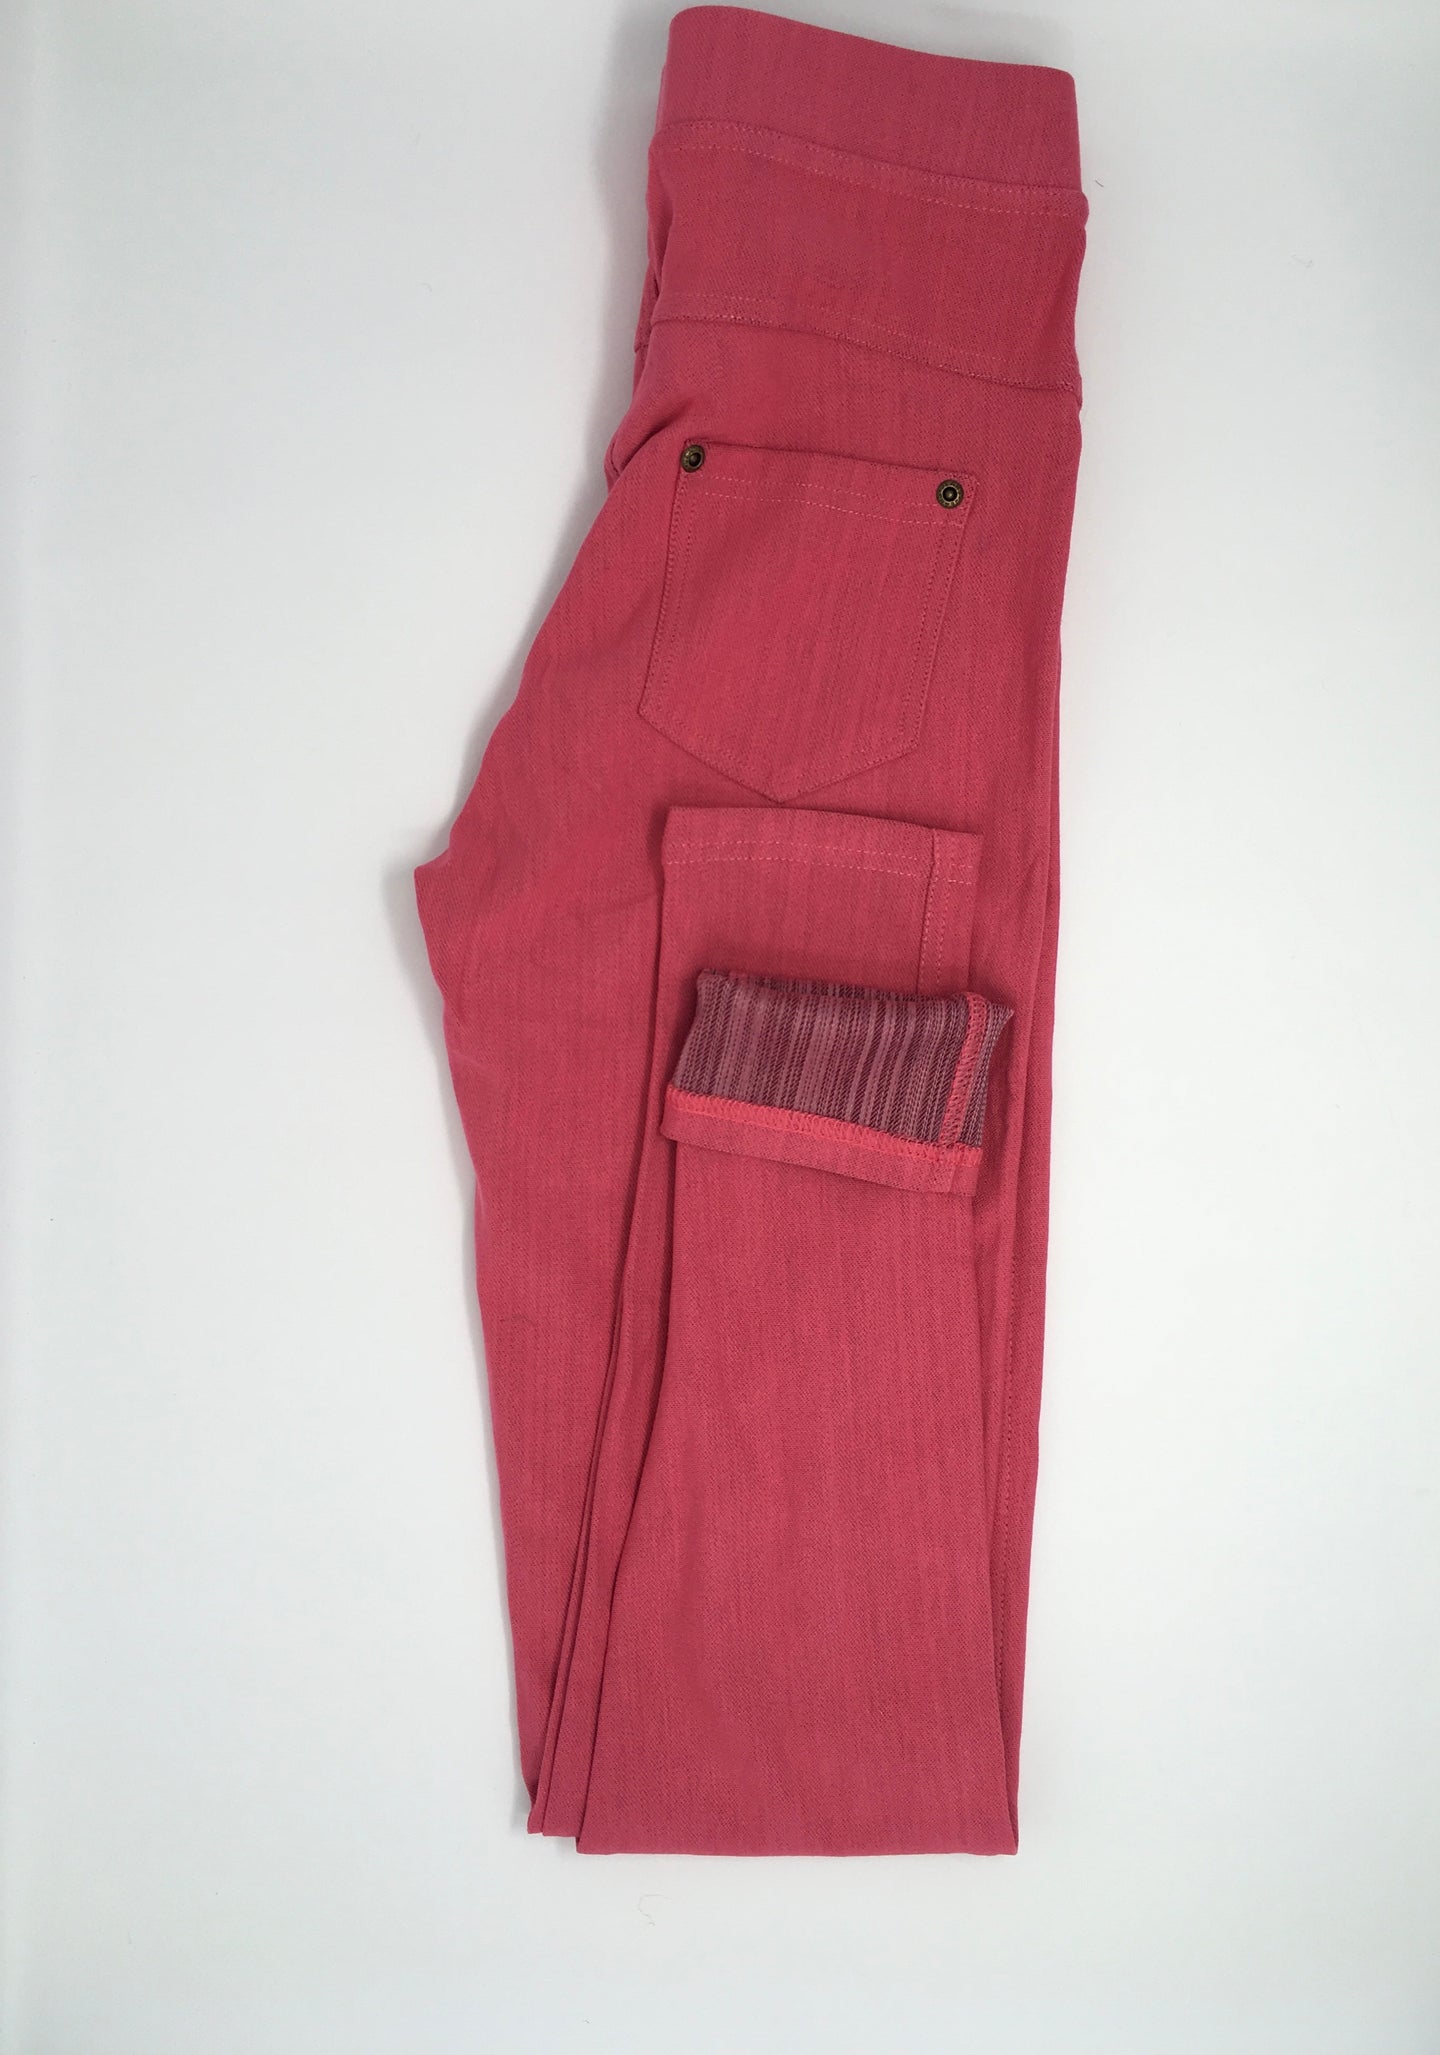 Hot Pink Jeggings – Worn & Refined